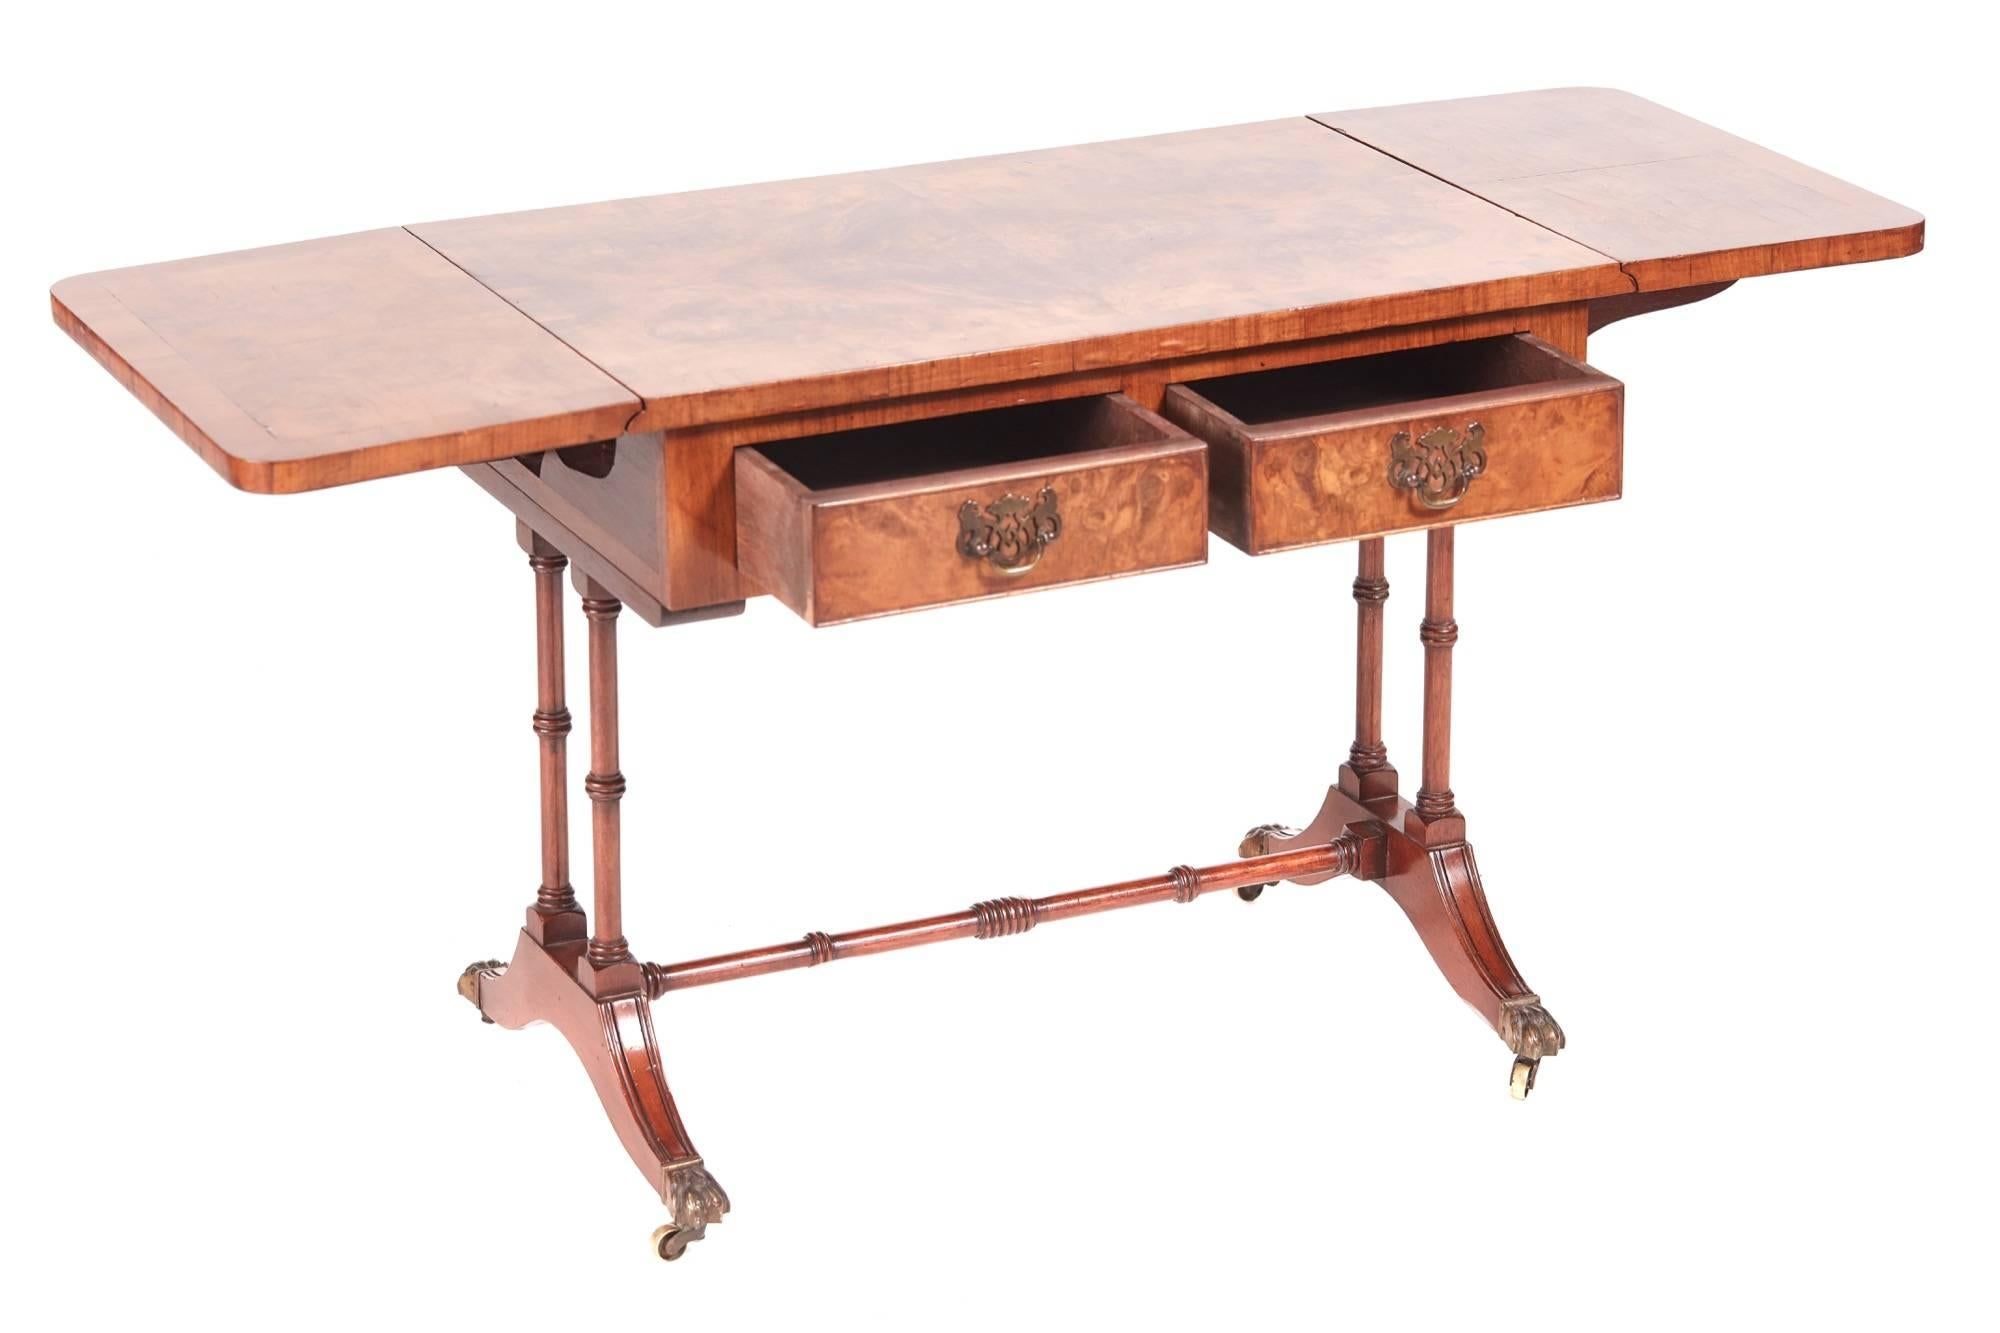 Antique burr walnut coffee table, having a lovely burr walnut crossbanded top with two drop leaves, two drawers to the frieze with original brass handles, supported by four turned columns, standing on shaped sabre legs with original brass castors